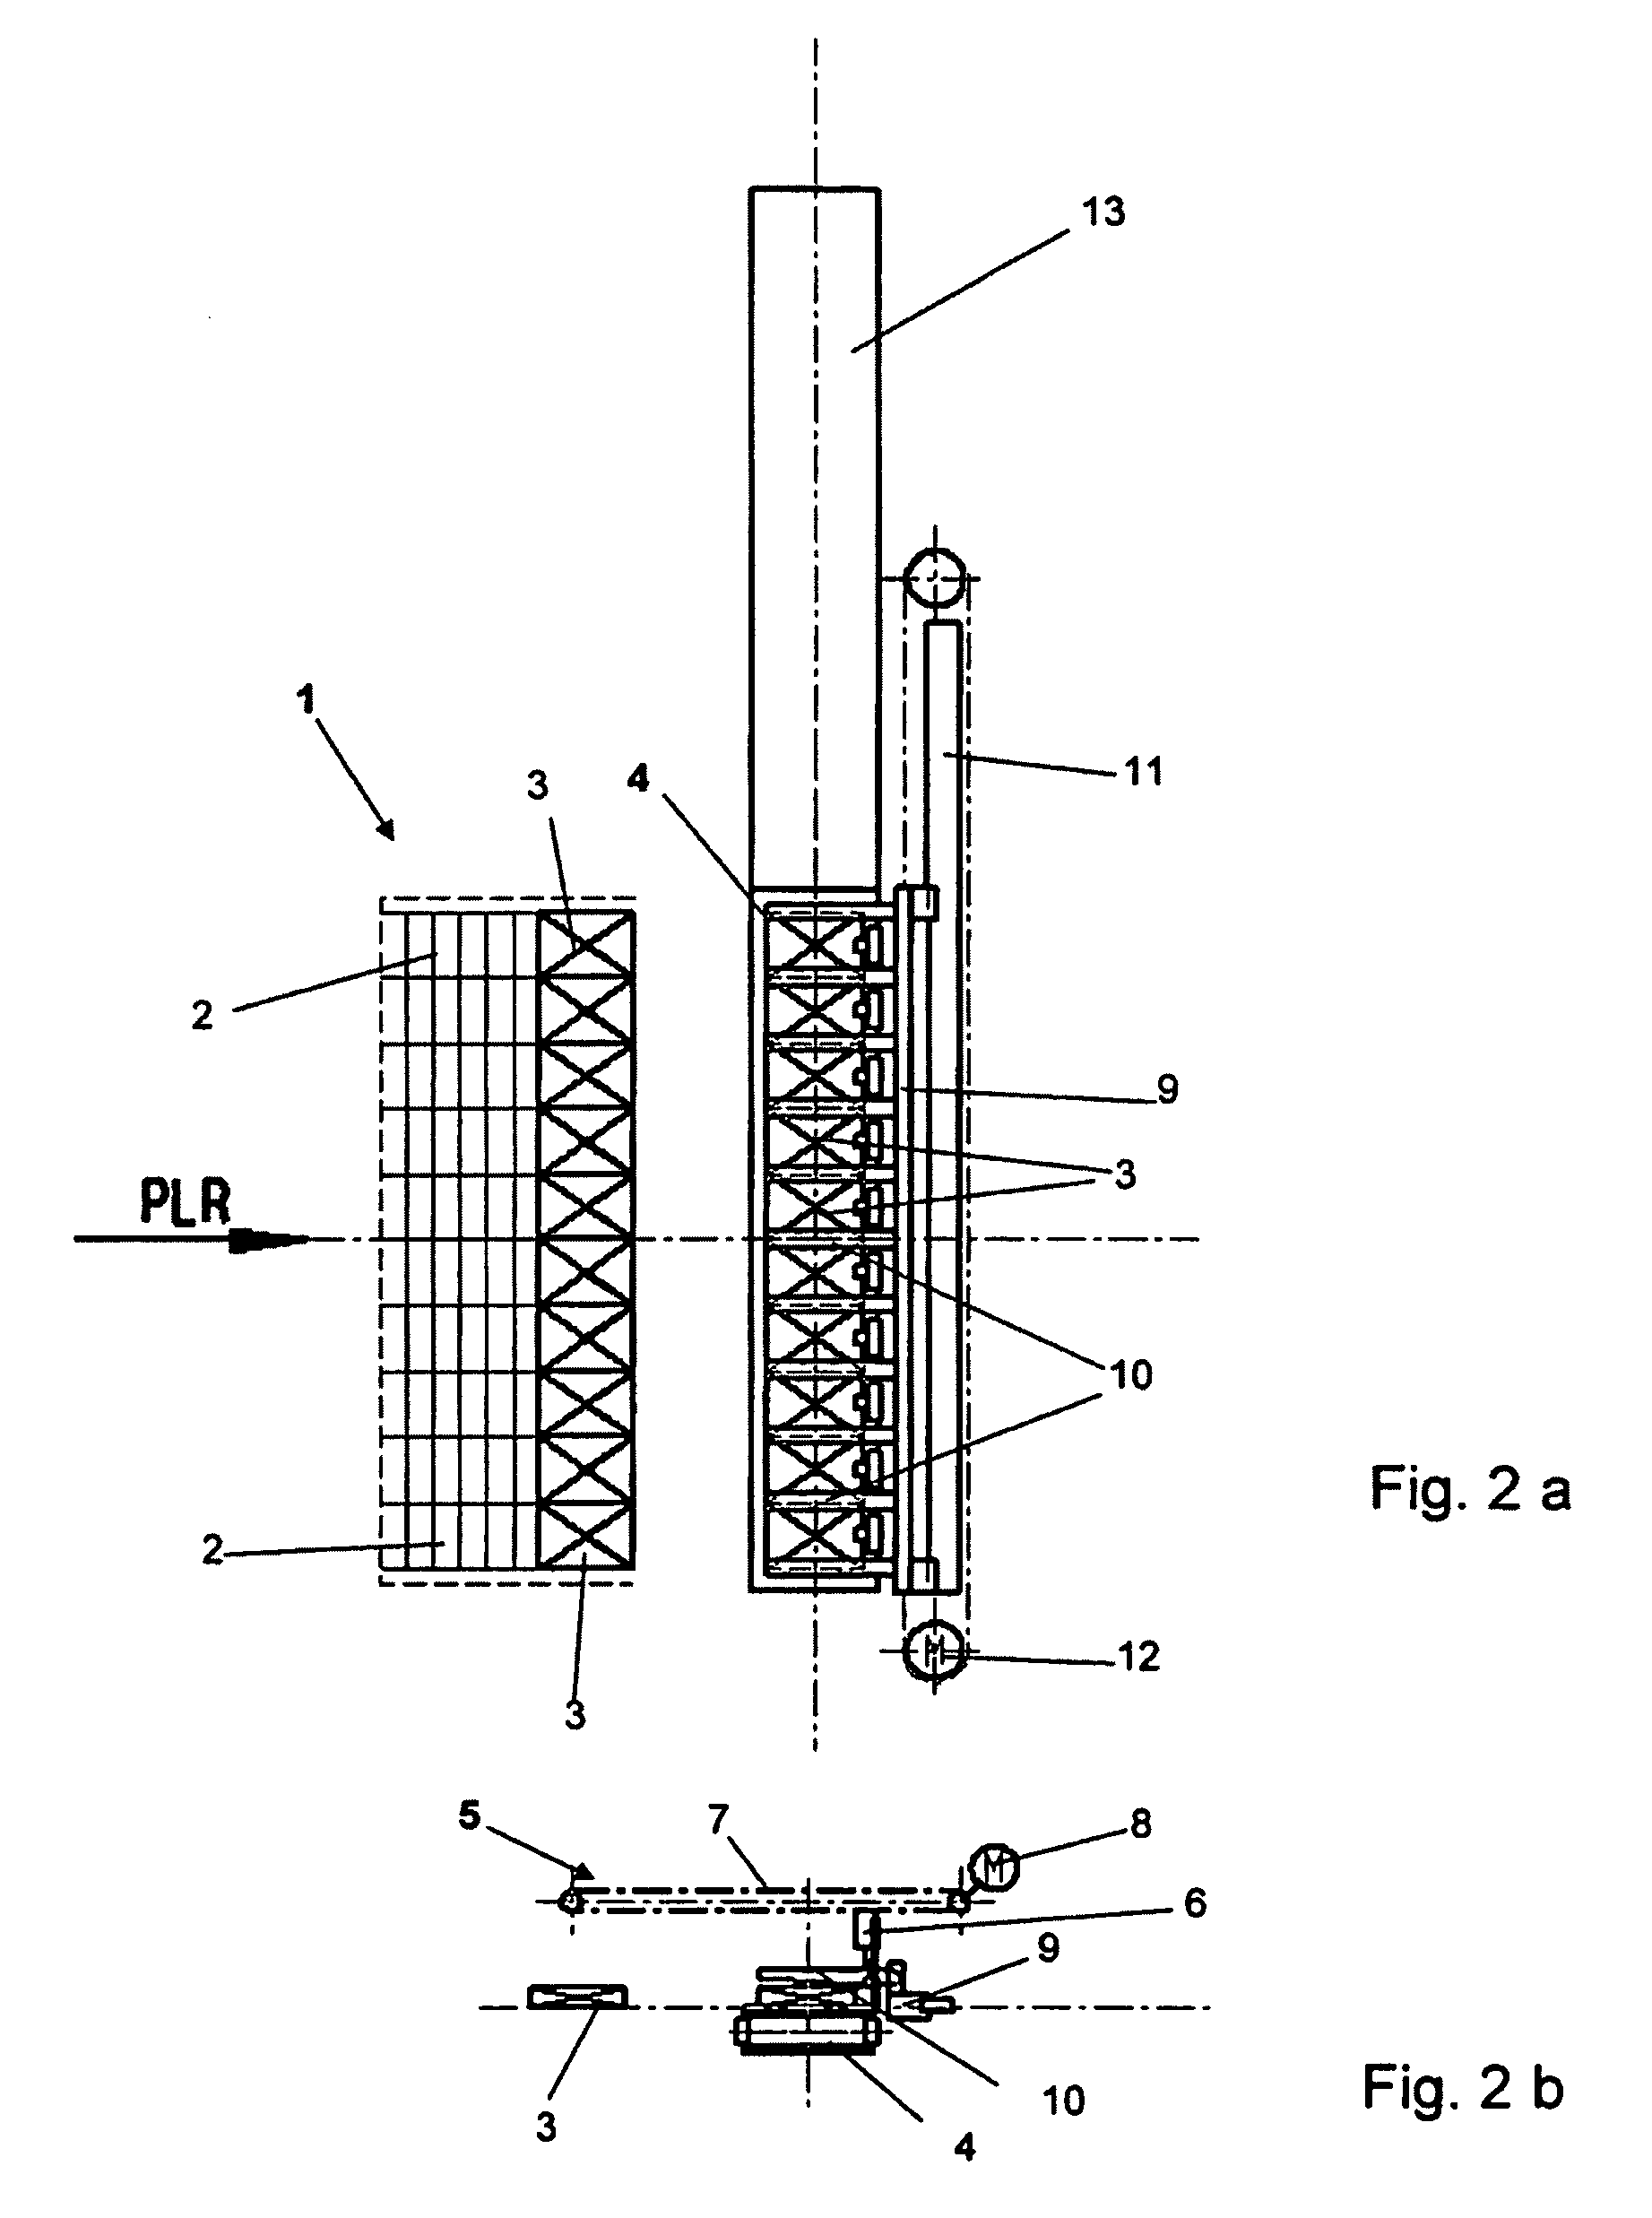 Apparatus for collecting and conveying stacks of sheets